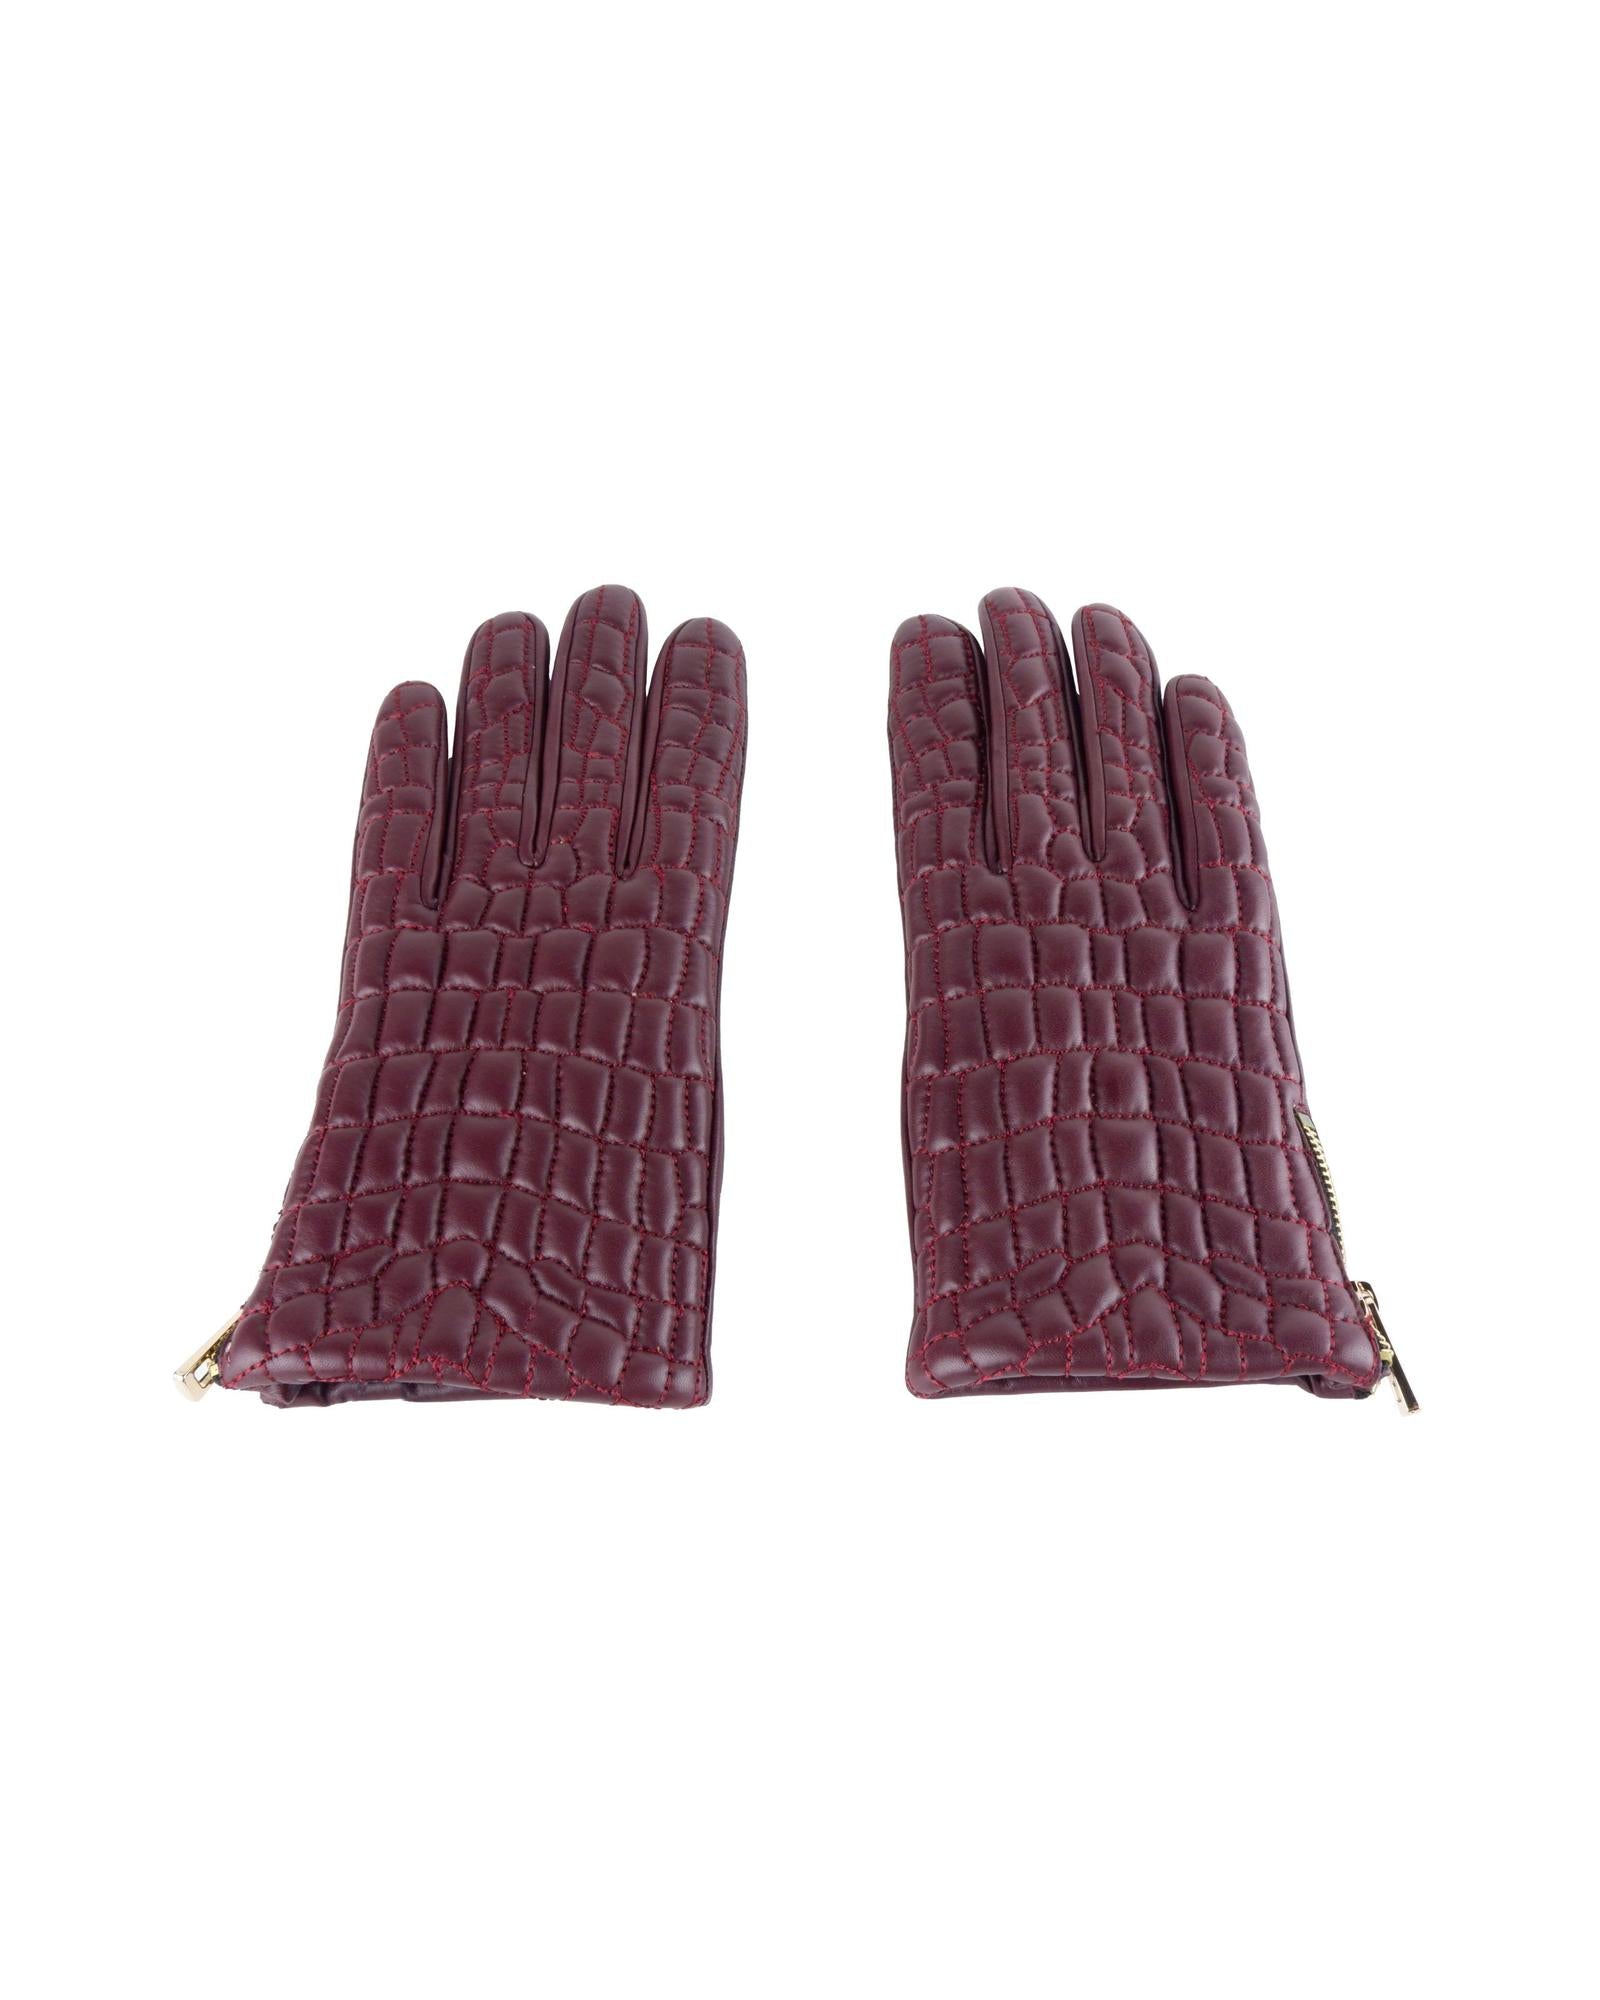 Lady Glove in Red Style CQZ.003 7.5 Women